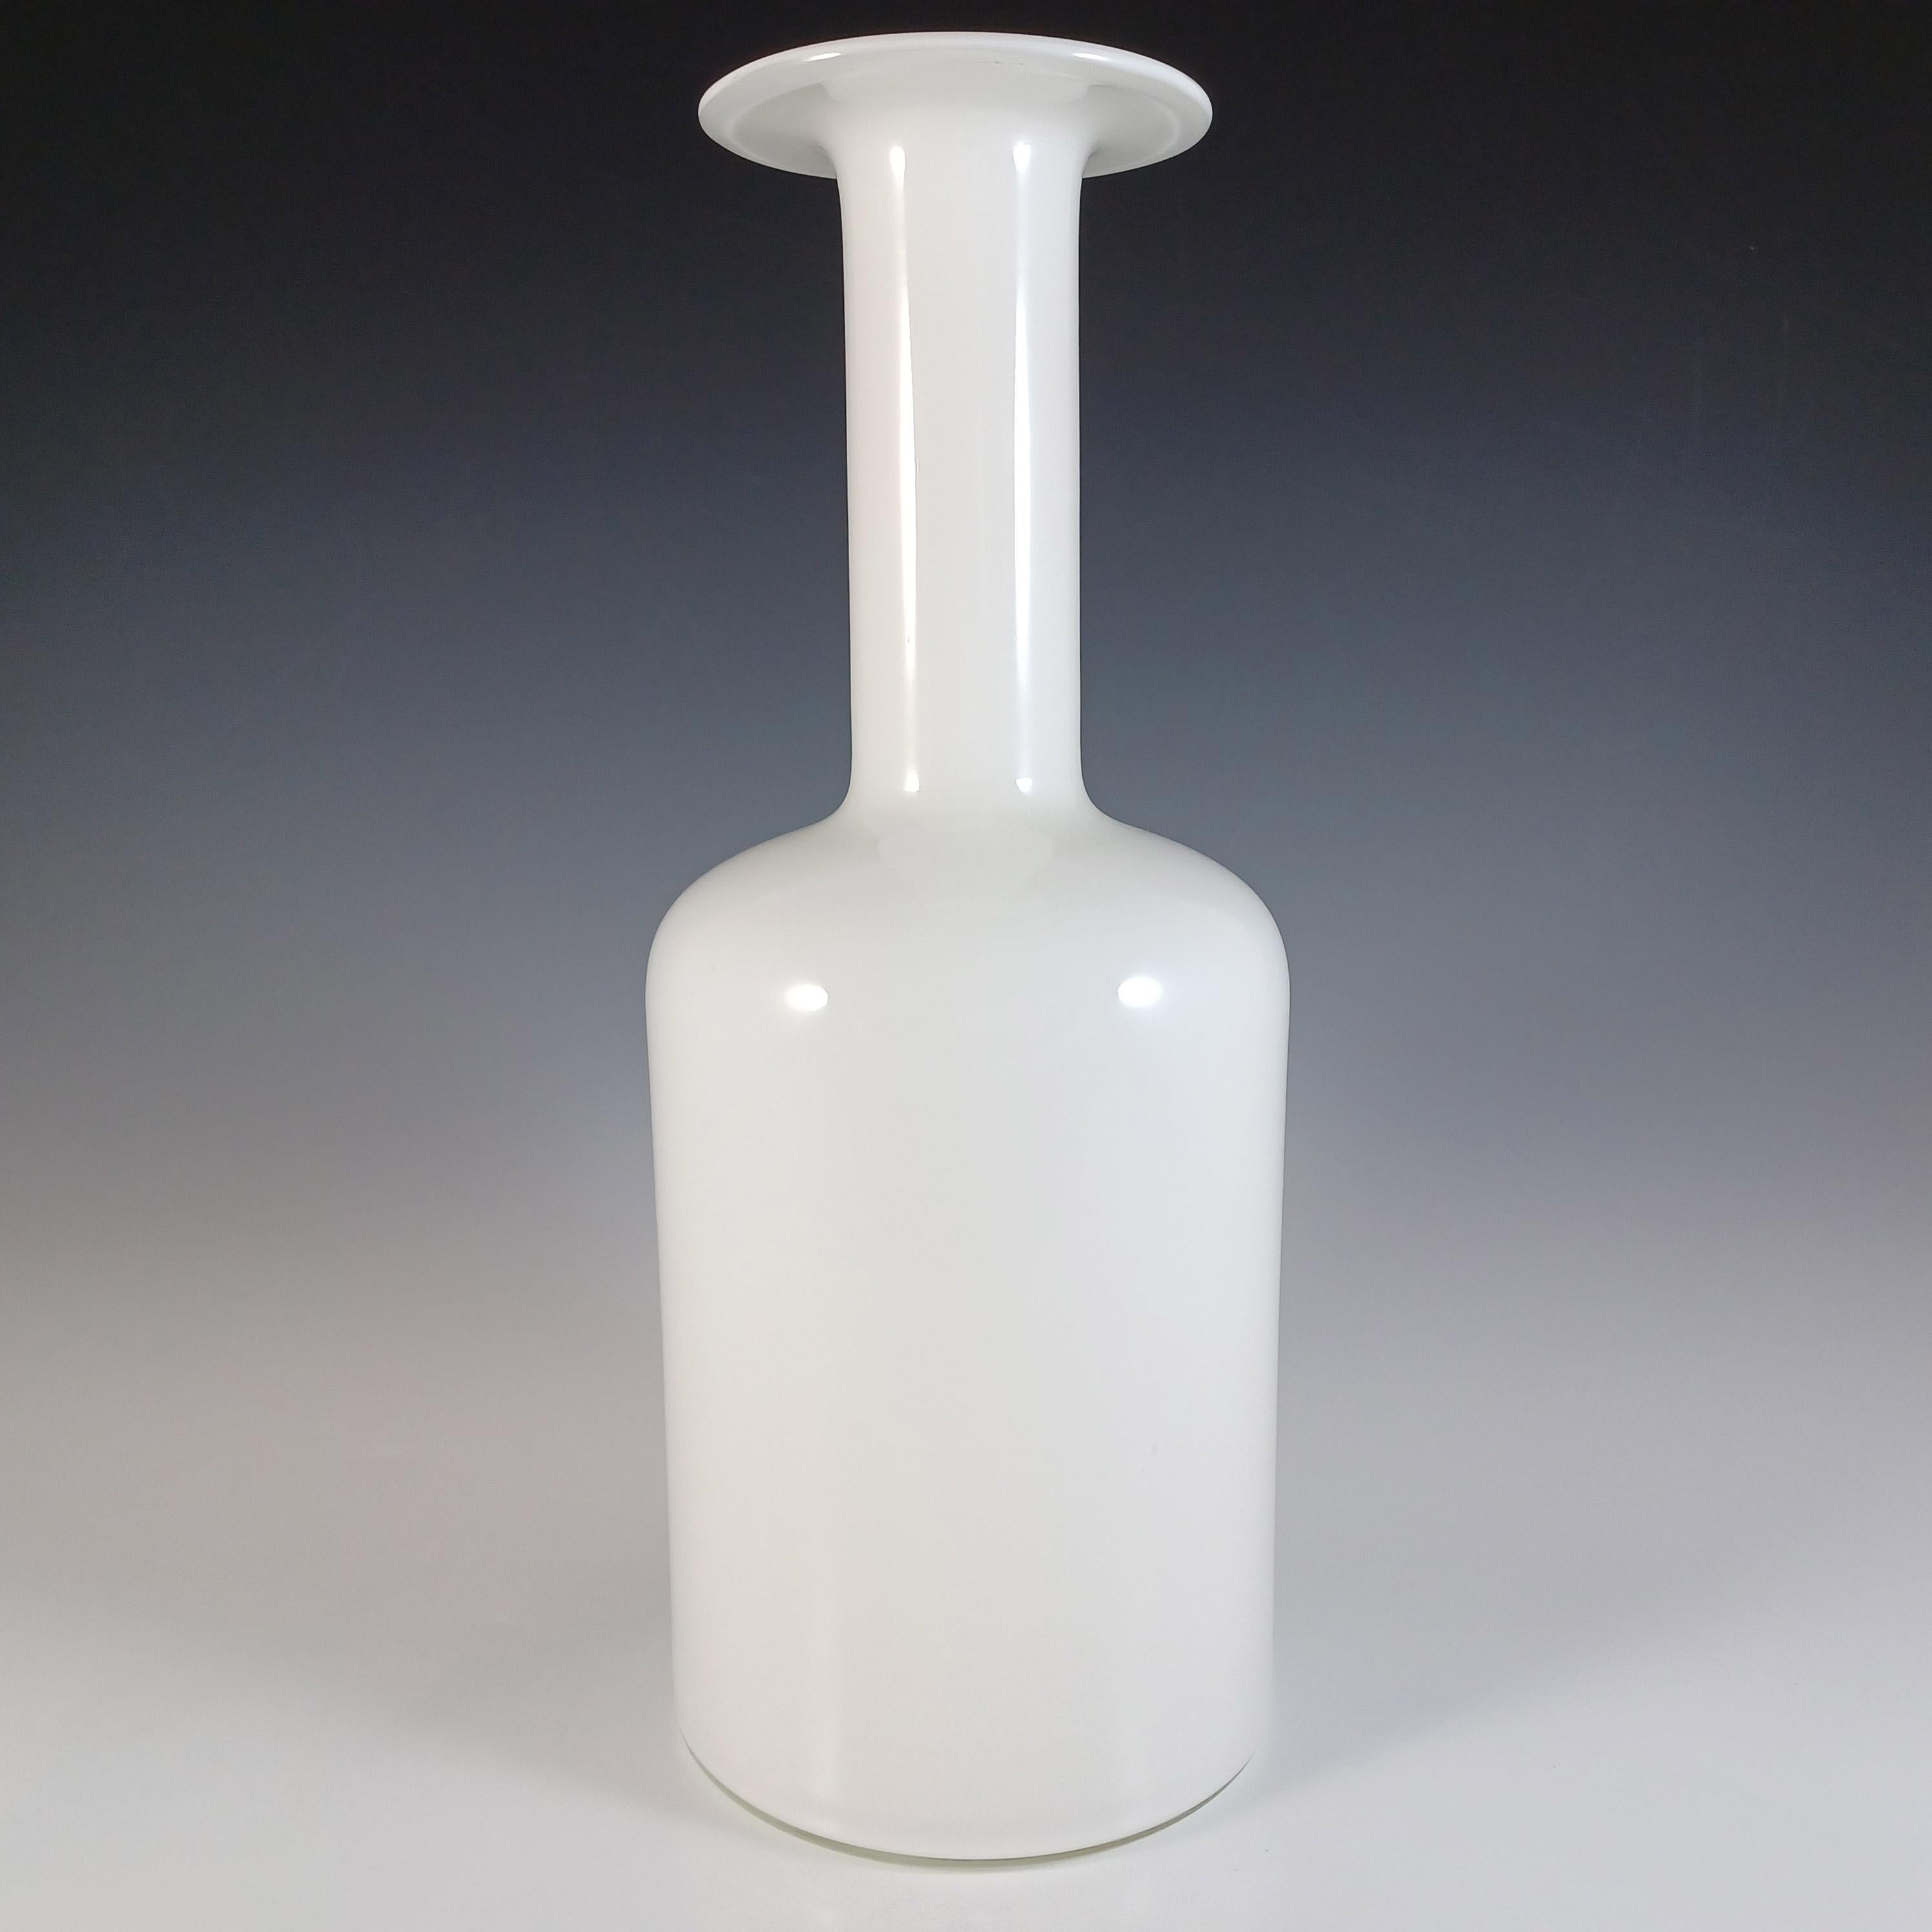 A stunning Scandinavian opaque white 'opal' glass 'Gulvvase' (Danish for floor vase). Made by Holmegaard of Denmark, and designed by Otto Brauer in 1962.